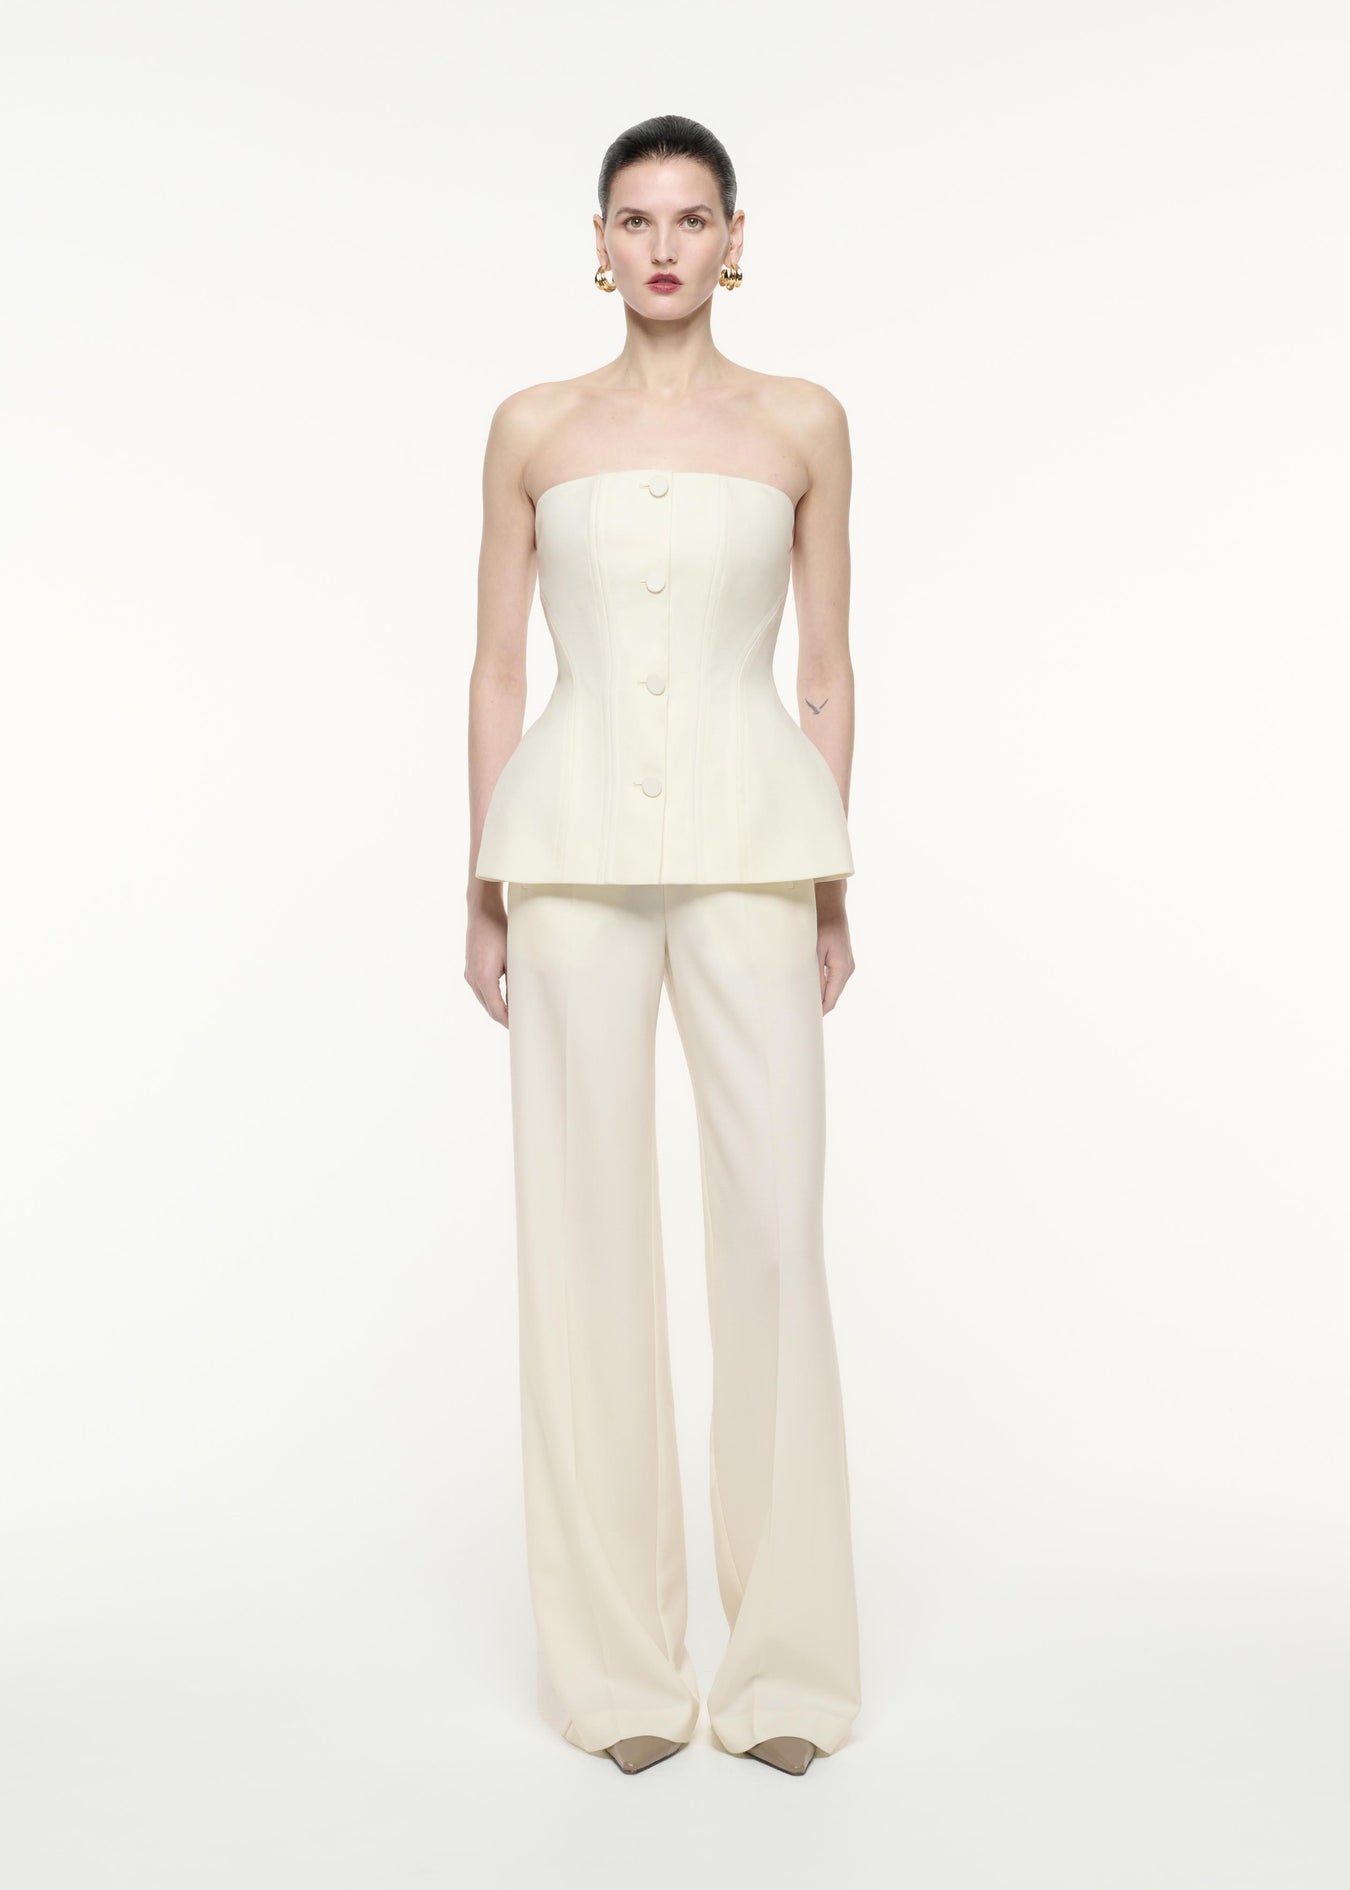 A front view image of a model wearing the Strapless Tailoring Wool Jumpsuit in Cream